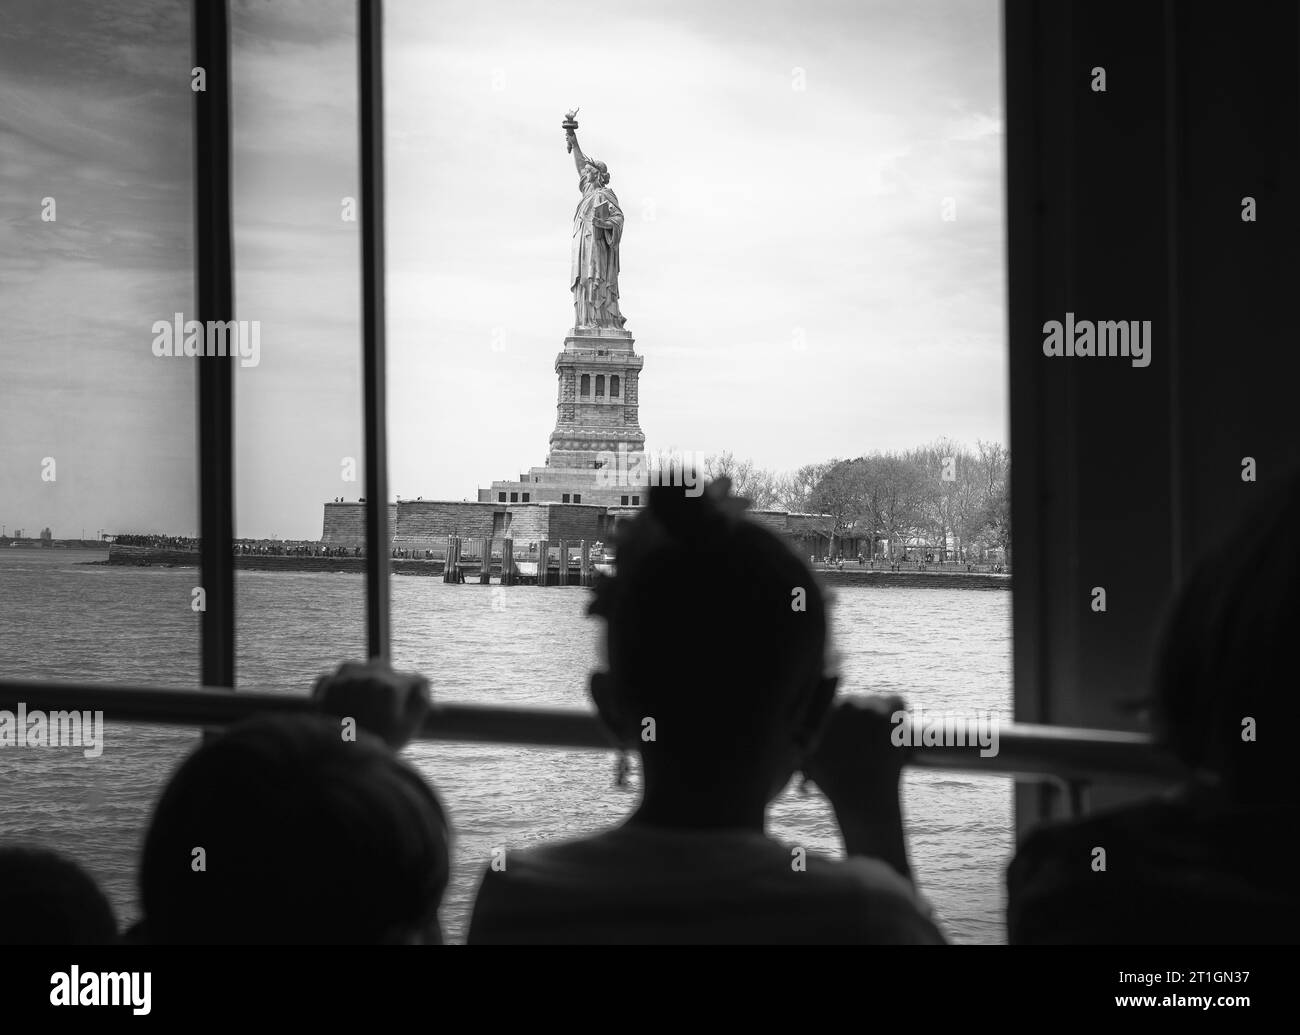 A young girl looks at the Statue of Liberty through a ferry window in New York City, USA. Stock Photo